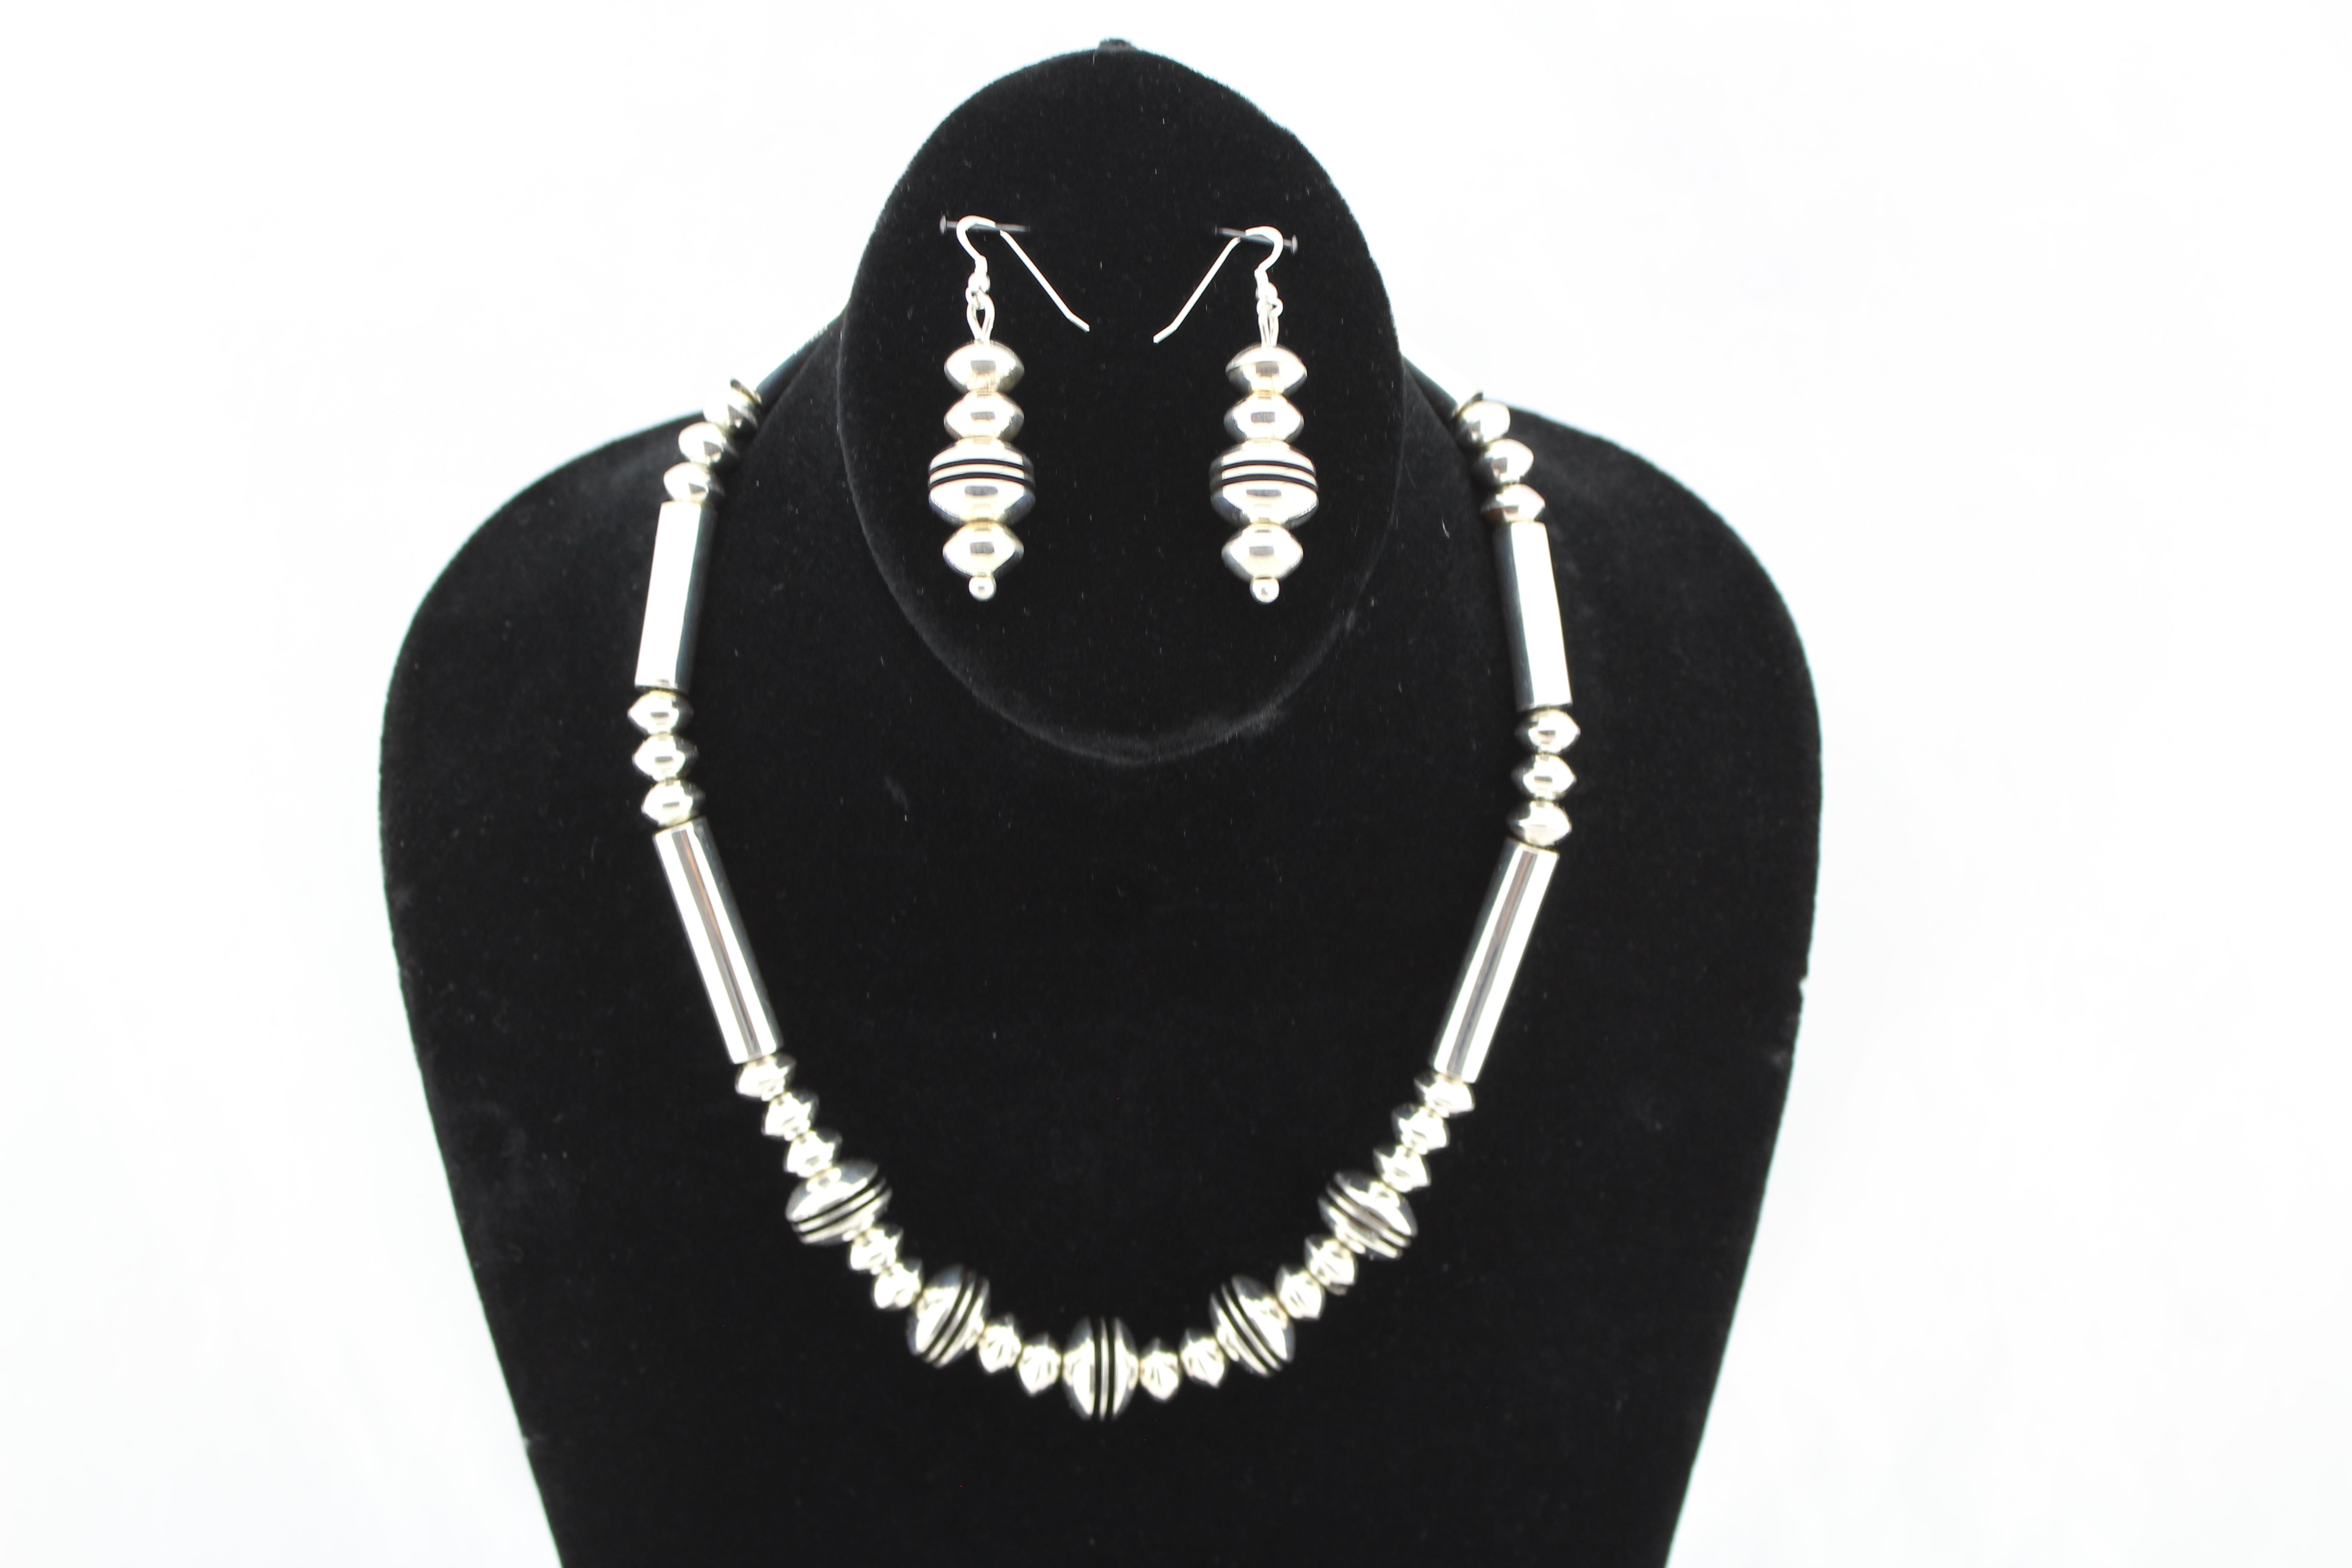 Jack Tom Sterling Silver Necklace and Earrings